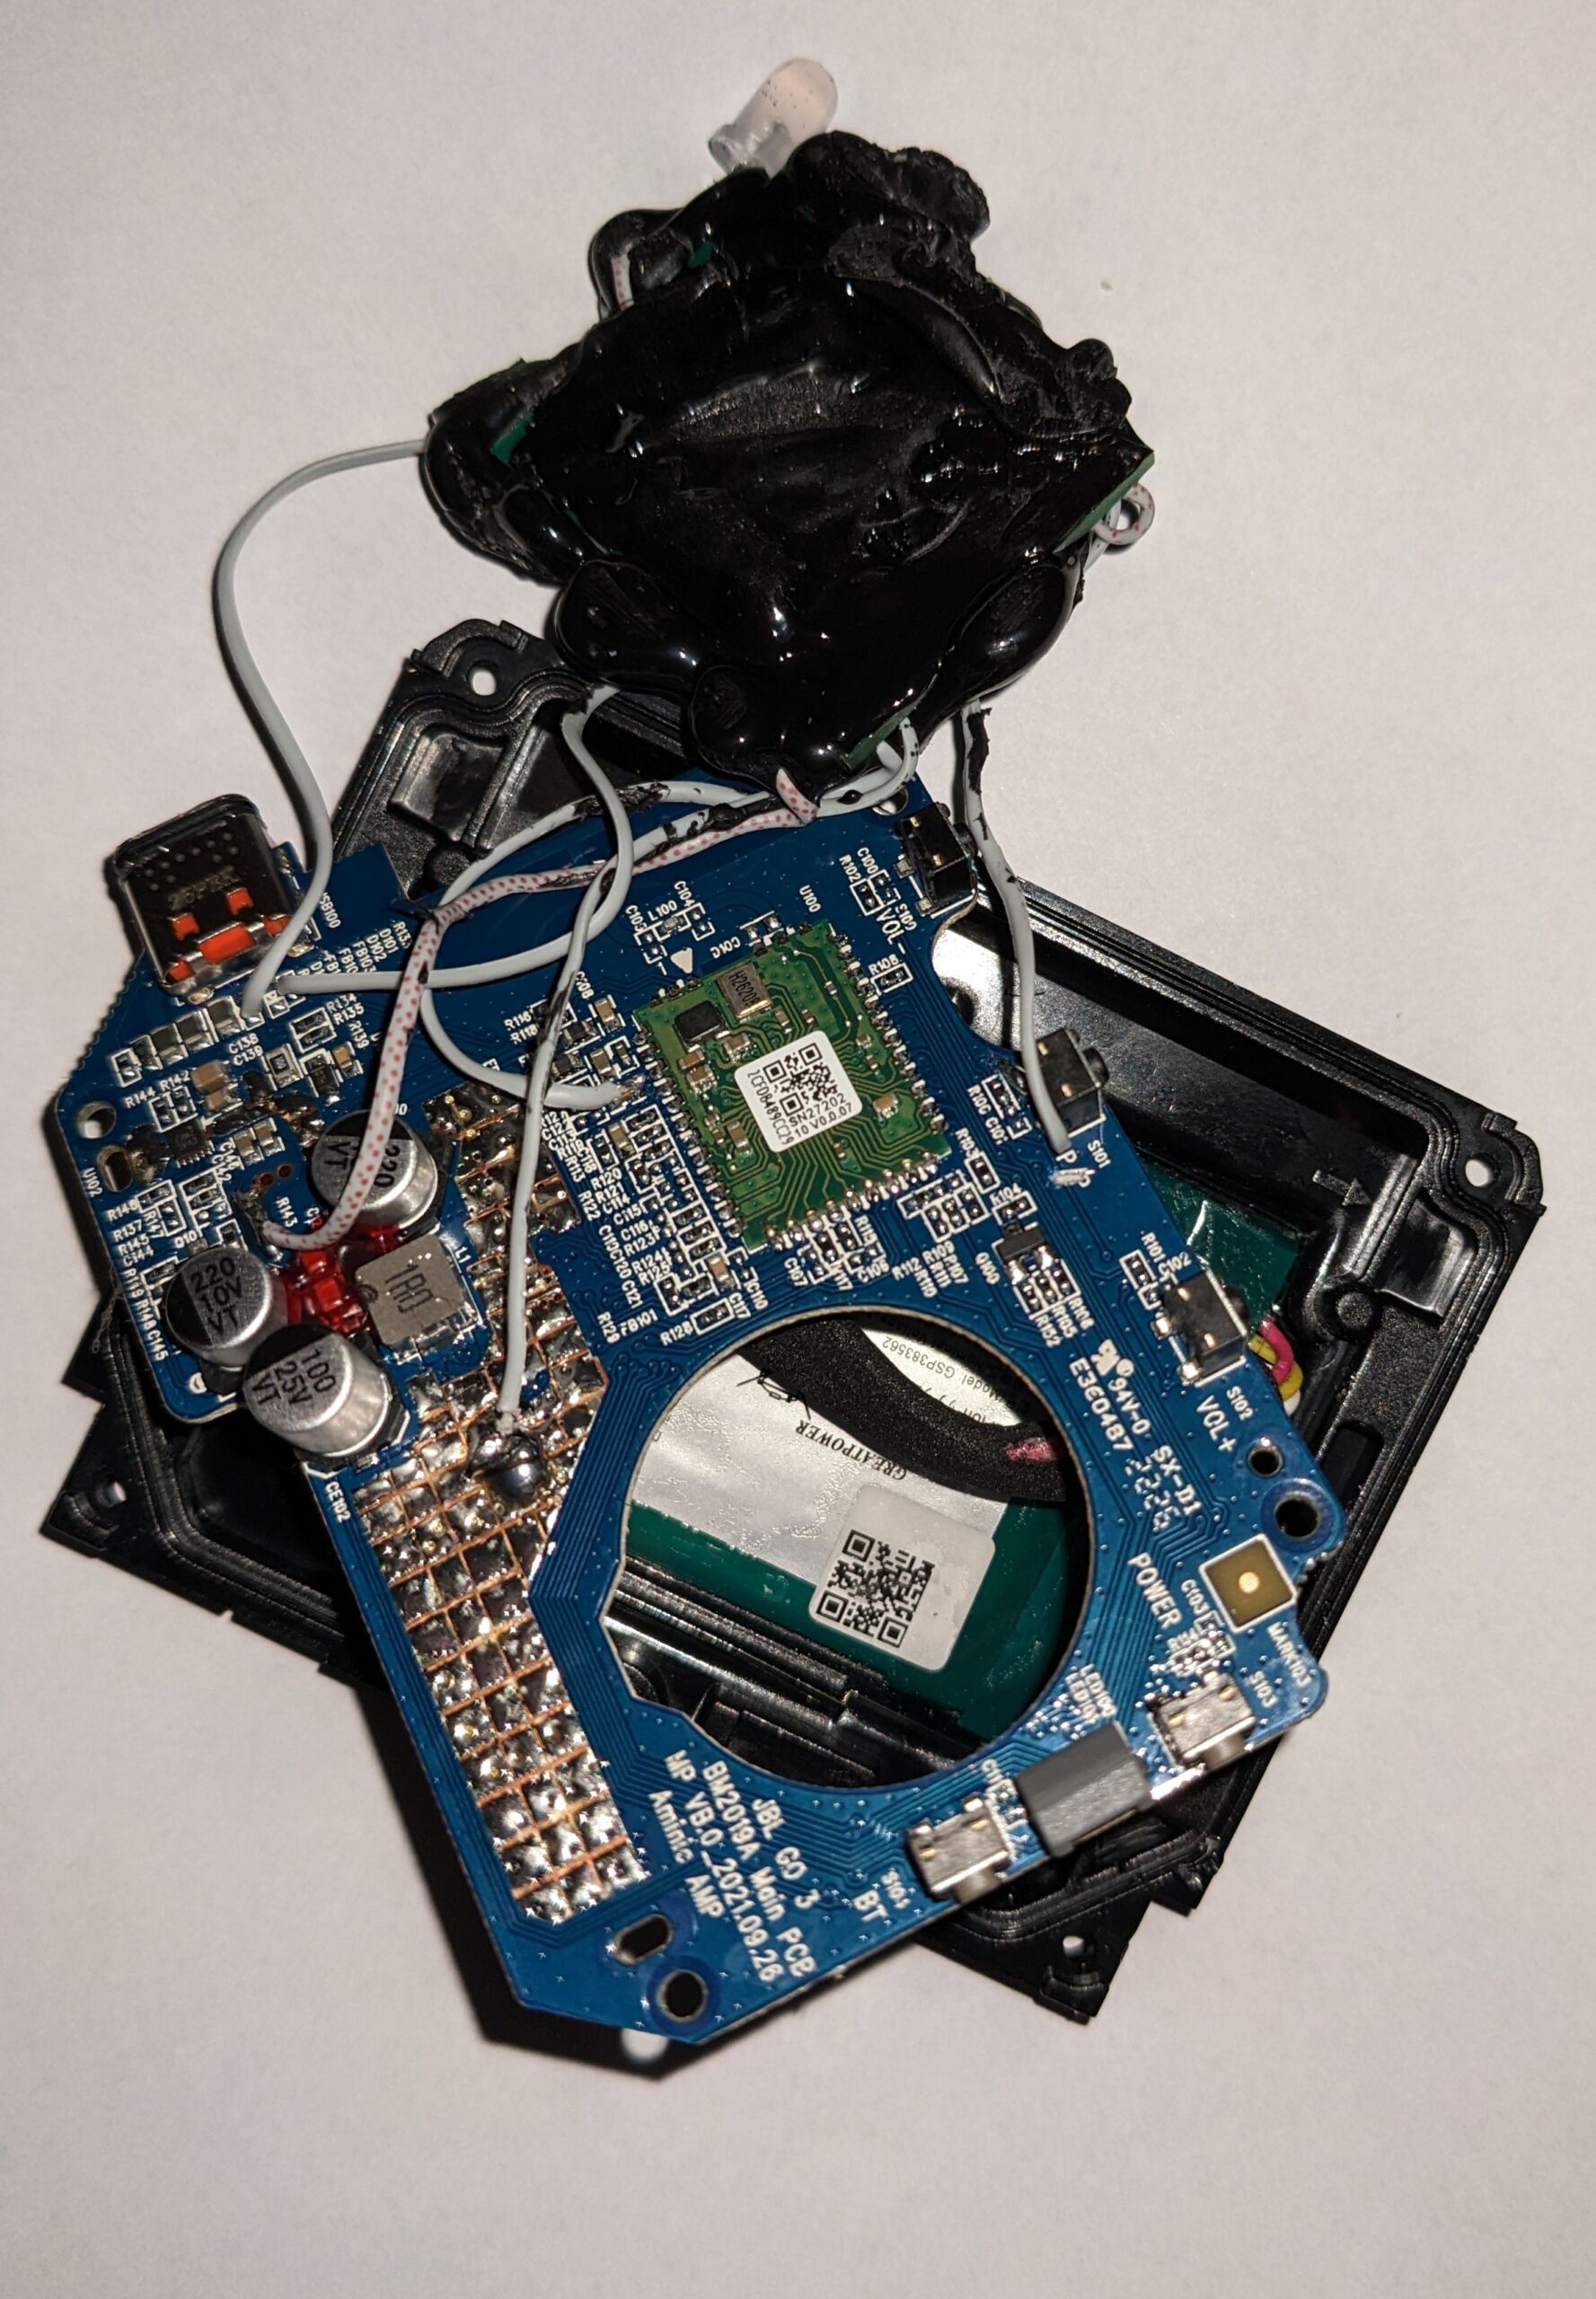 CAN Injector chips enclosed in a glob of resin grafted onto the JBL circuit board.